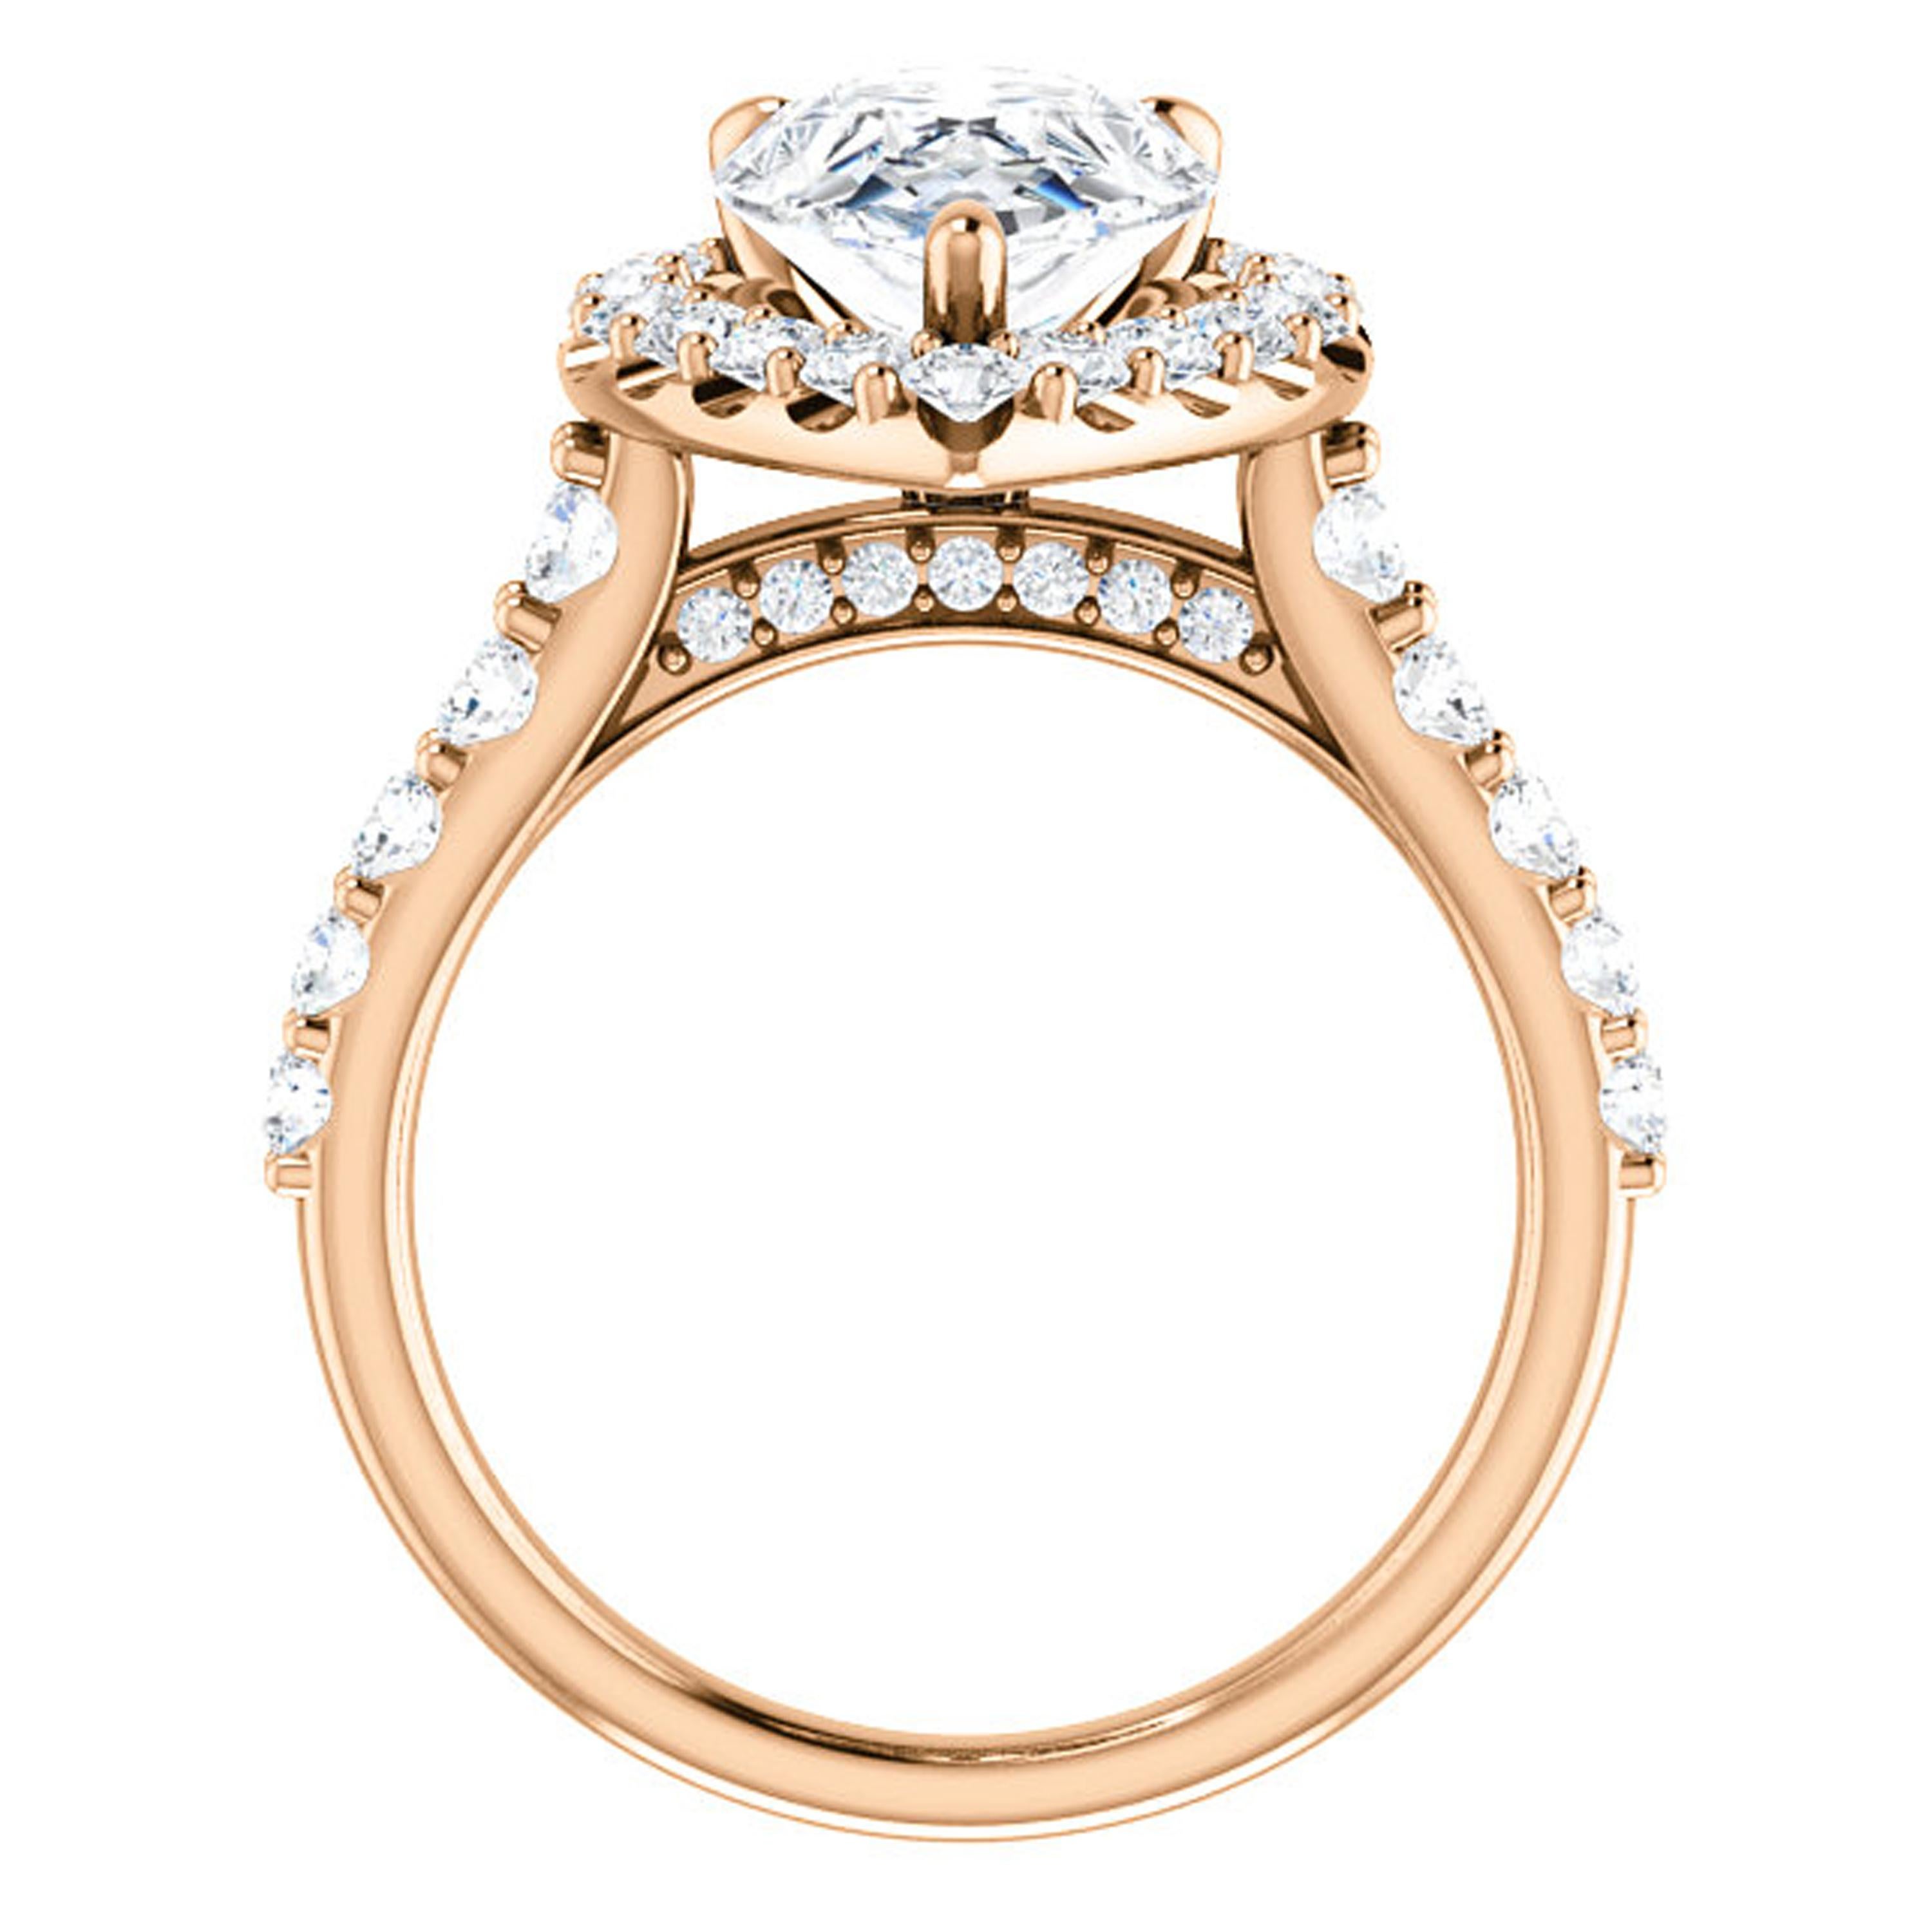 Flaunting romance and beautify with an eye-catching GIA certified pear shape natural diamond, this unique engagement ring features shimmering white diamonds surrounding the halo. Additional sparkling diamonds line the gallery and a high polish